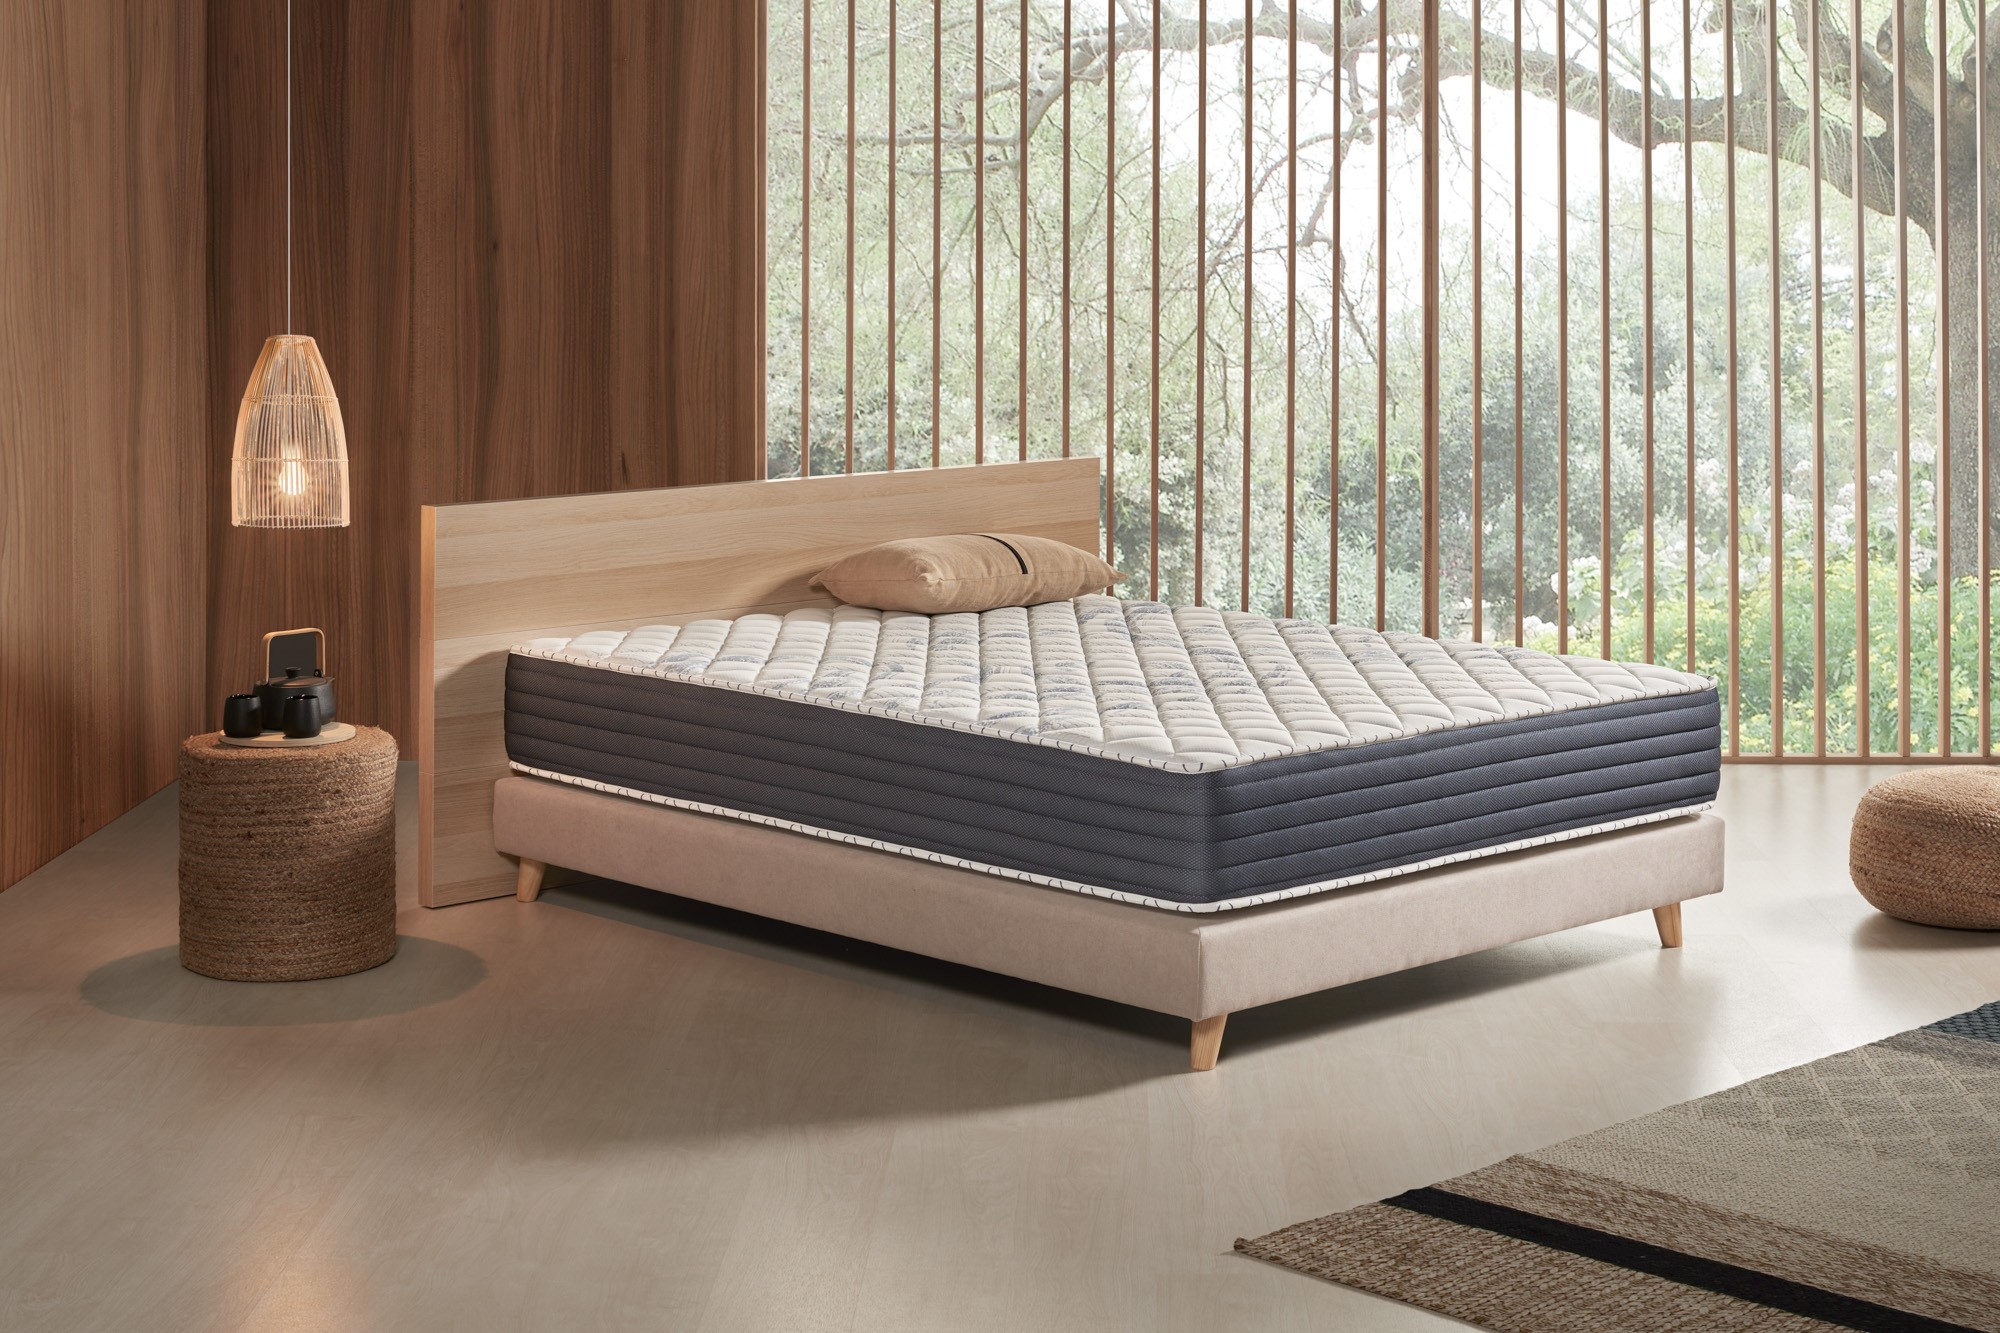 Guide for buying the best memory foam mattress